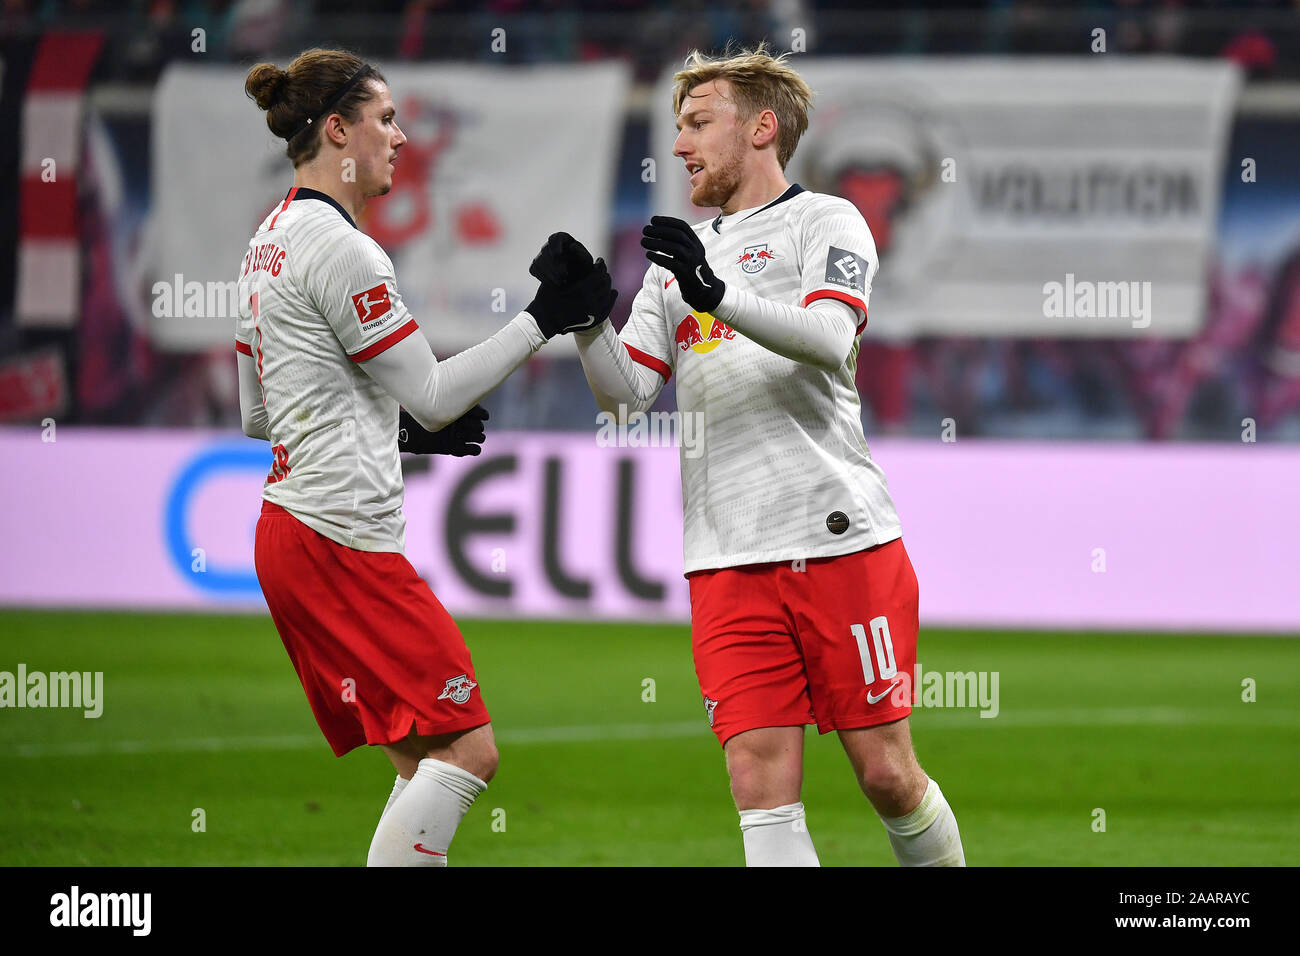 goaljubel Emil FORSBERG (L, re) after goal to 2-0 with Marcel SABITZER (L), jubilation, joy, enthusiasm, action. Soccer 1. Bundesliga, 12.matchday, matchday12, RB Leipzig (L) - 1.FC Cologne (K) 4-1, on 23/11/2019 in LEIPZIG, REDBULLARENA, DFL REGULATIONS PROHIBIT ANY USE OF PHOTOGRAPHS AS IMAGE SEQUENCES AND/OR QUASI-VIDEO. | usage worldwide Stock Photo